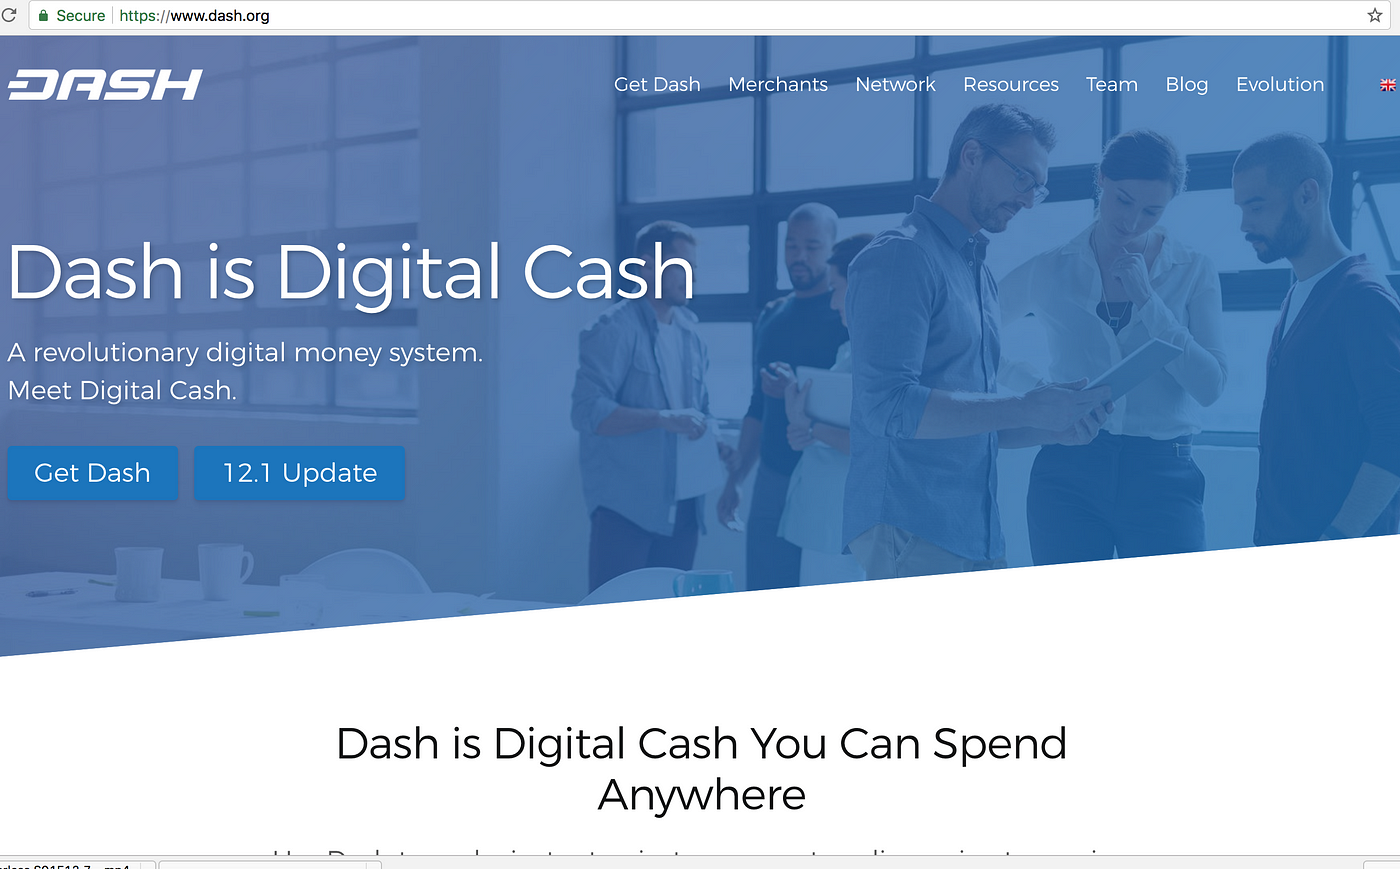 Dash - Dash is Digital Cash You Can Spend Anywhere